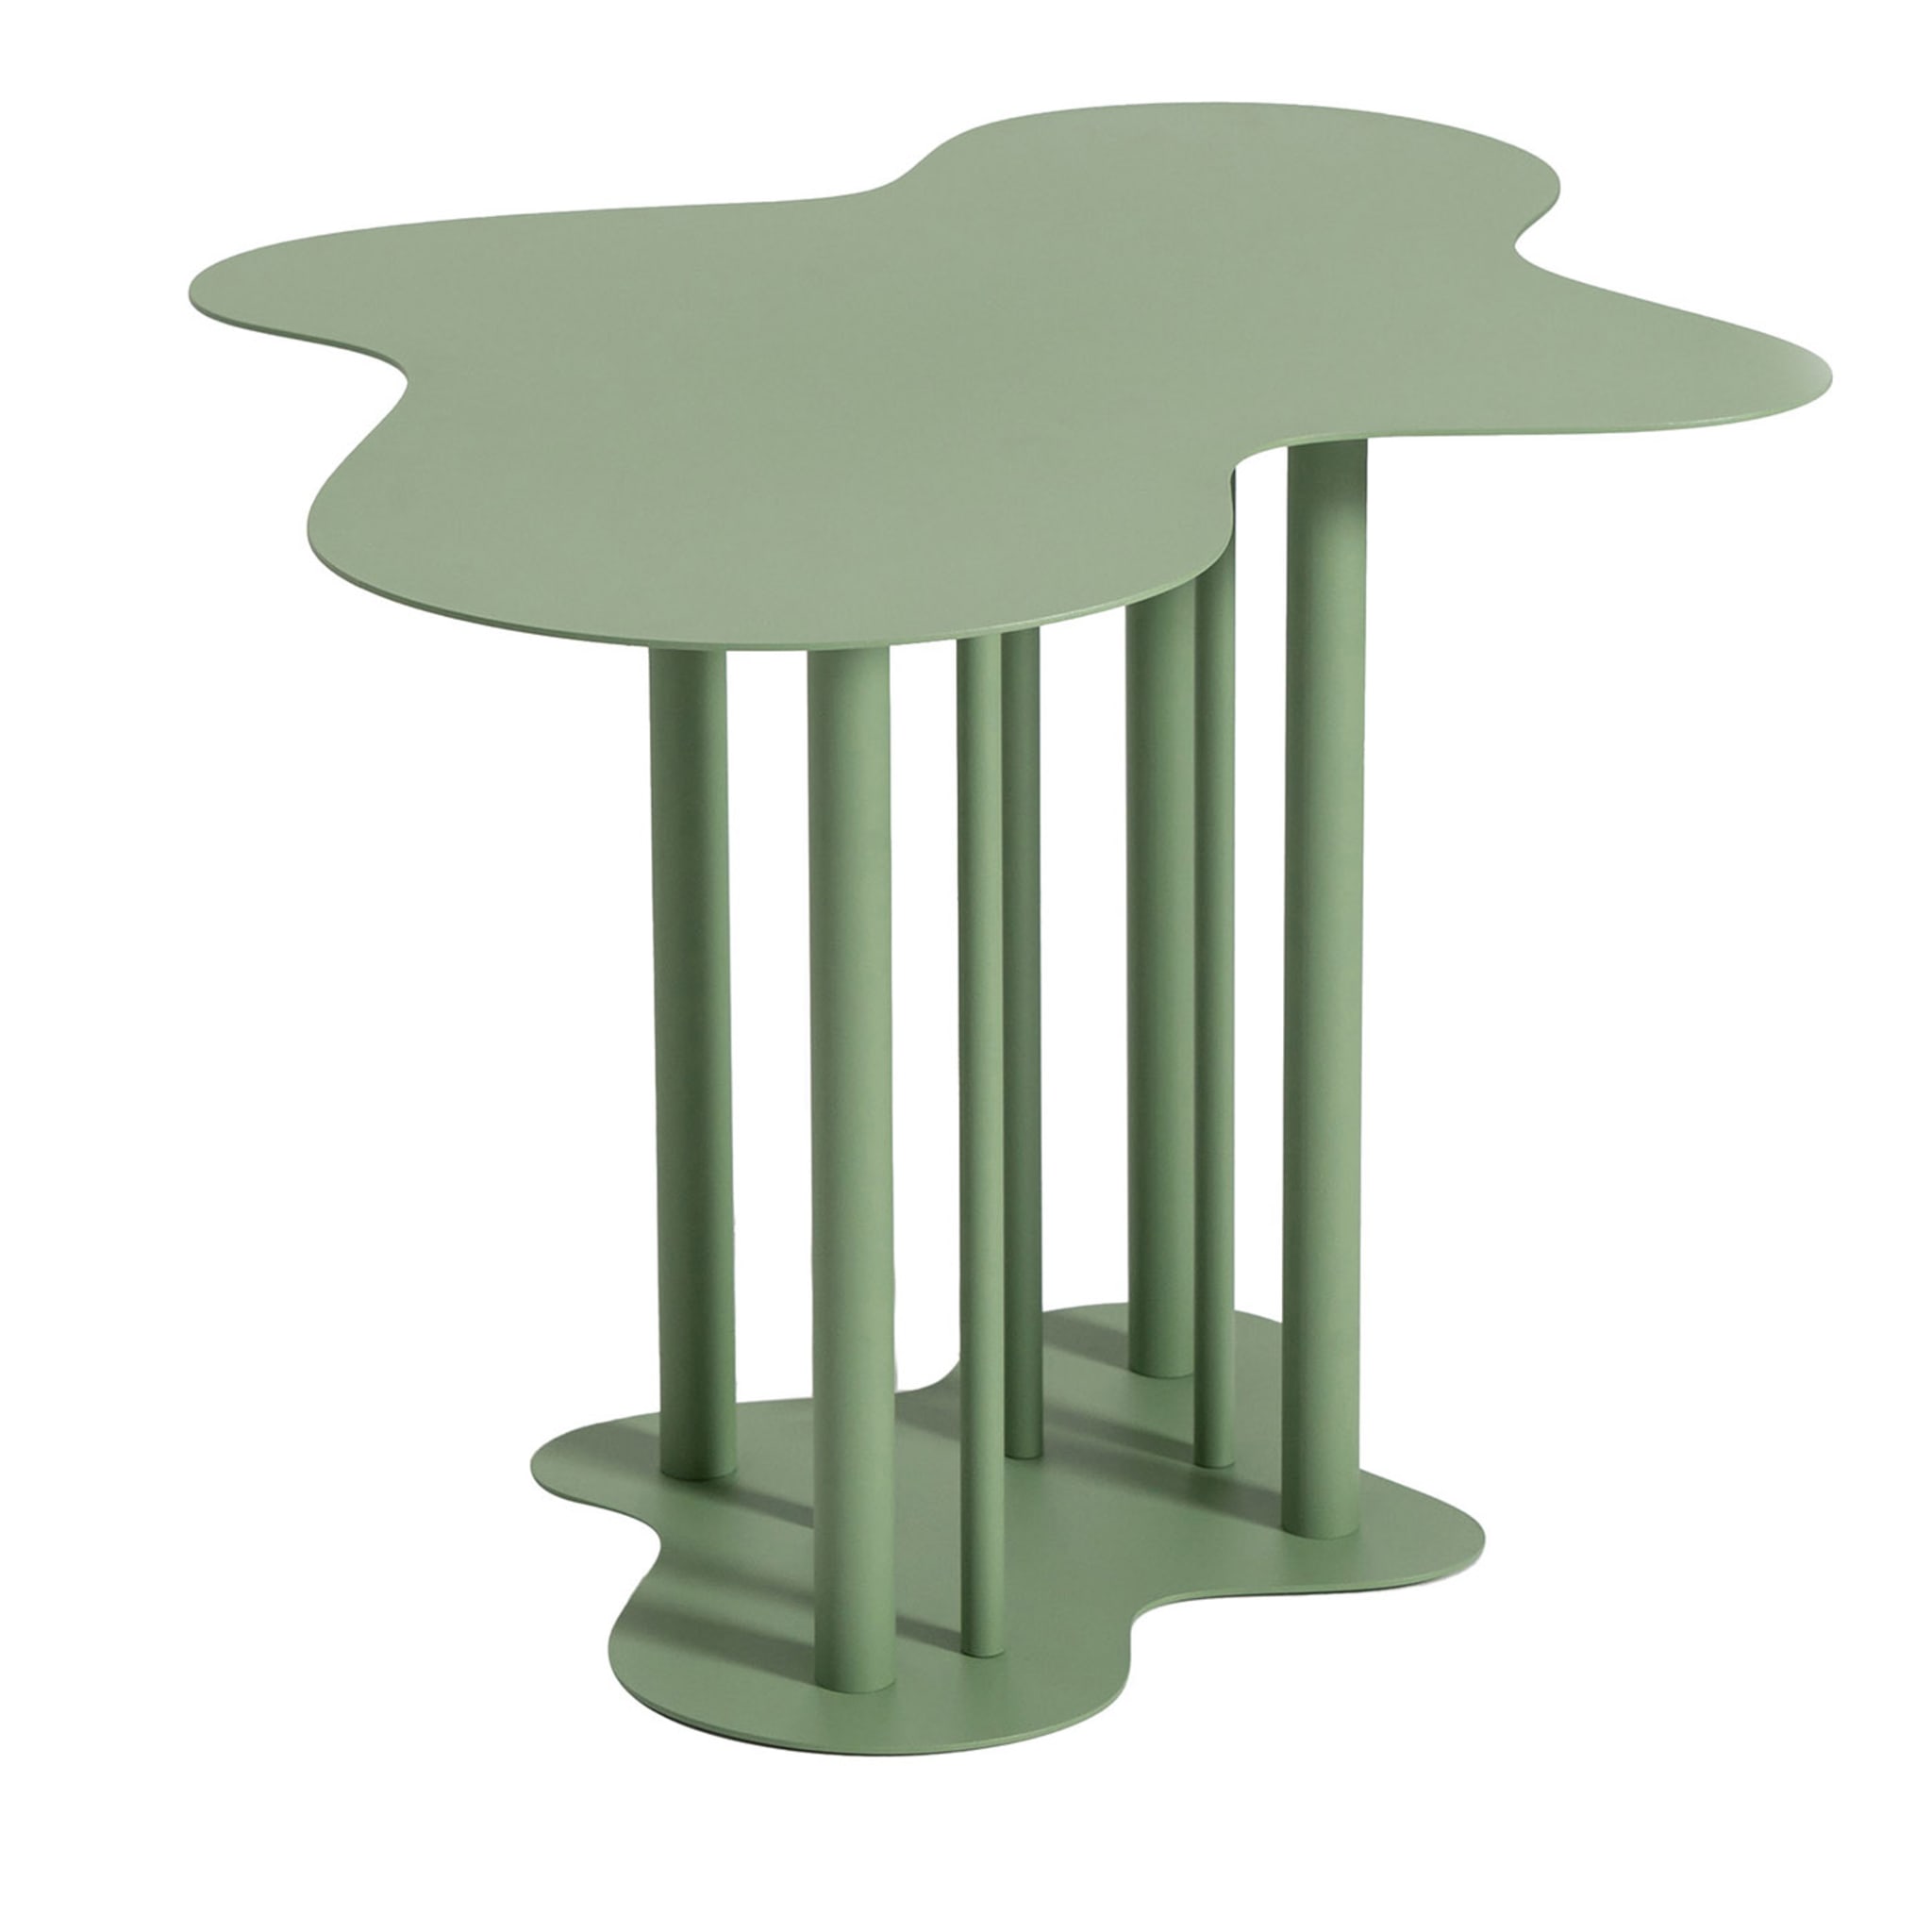 Nuvola 03 Pale Green Side Table by Mario Cucinella - Main view